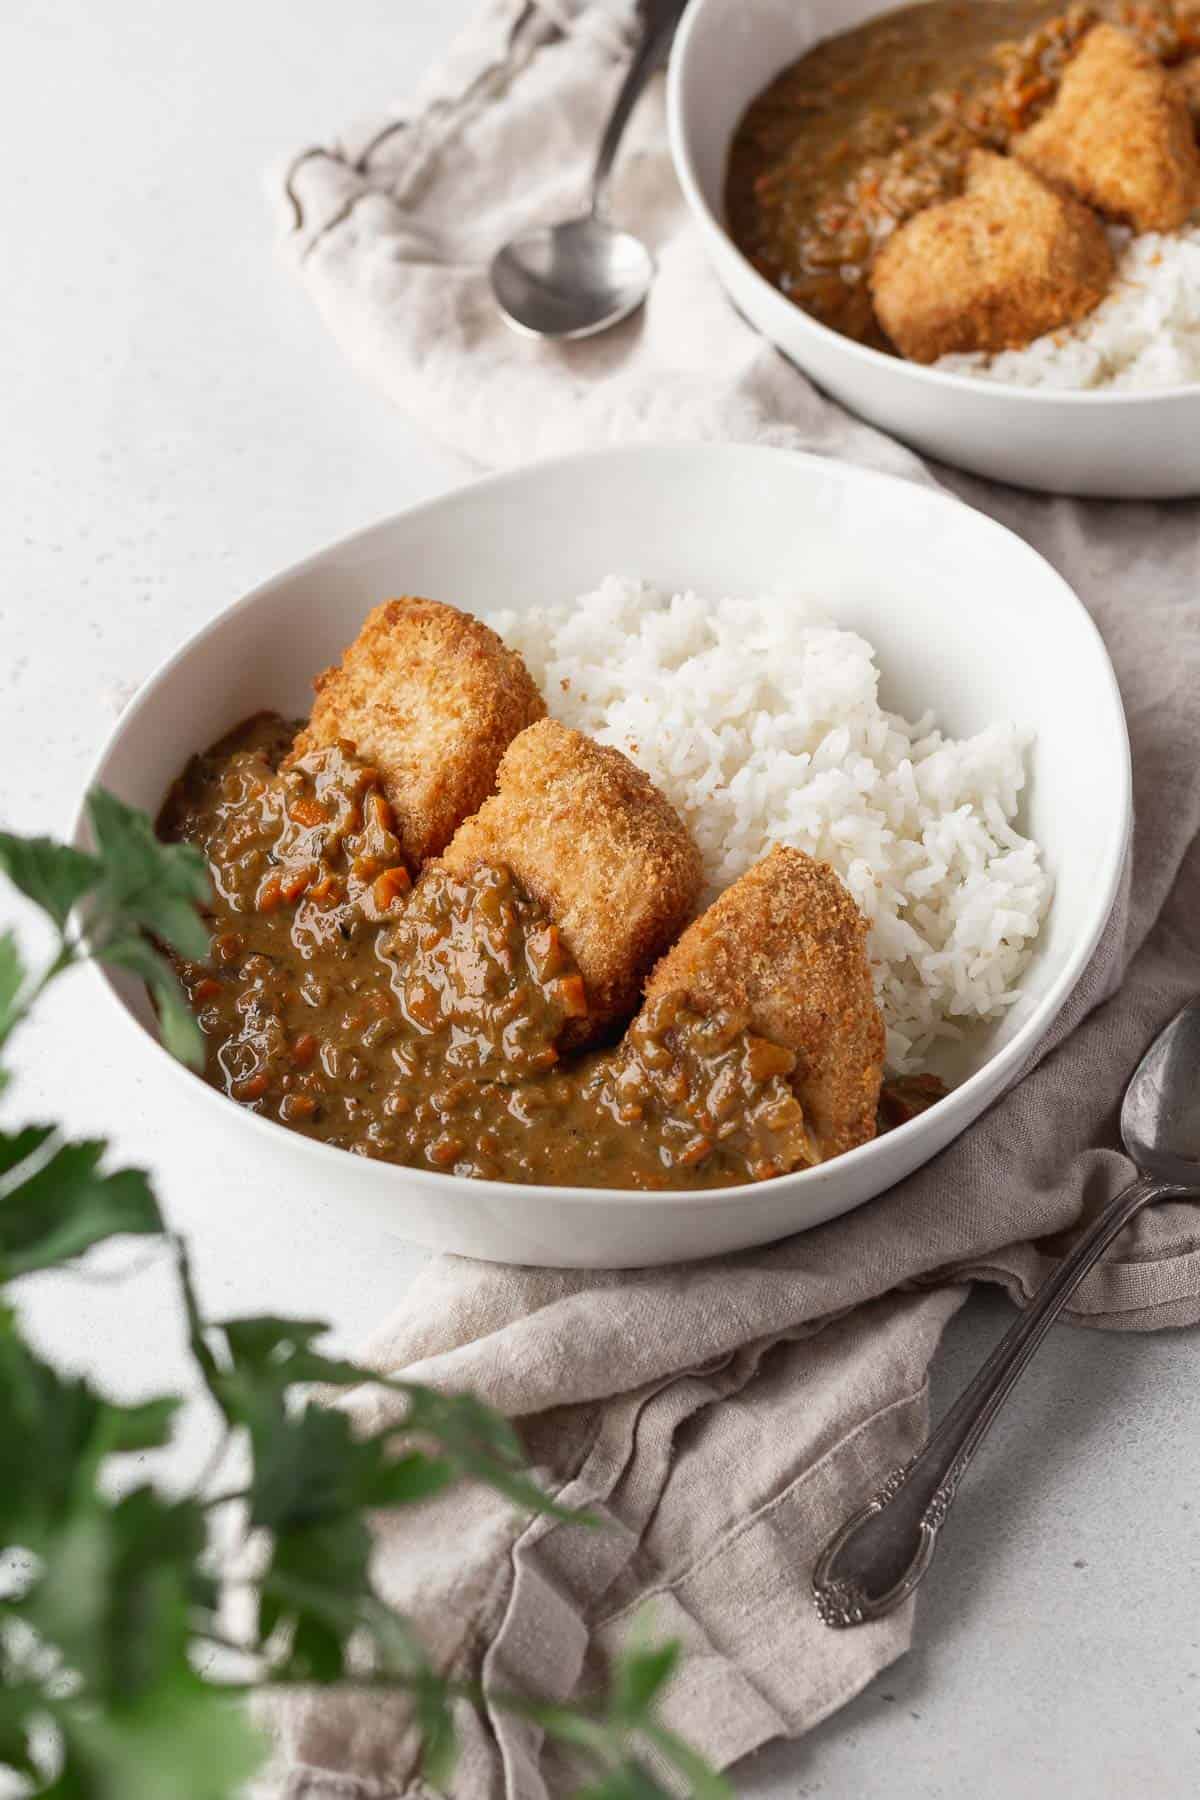 Vegan katsu curry in a white bowl on a linen with a flat leaf parsley plant in the corner of the shot.